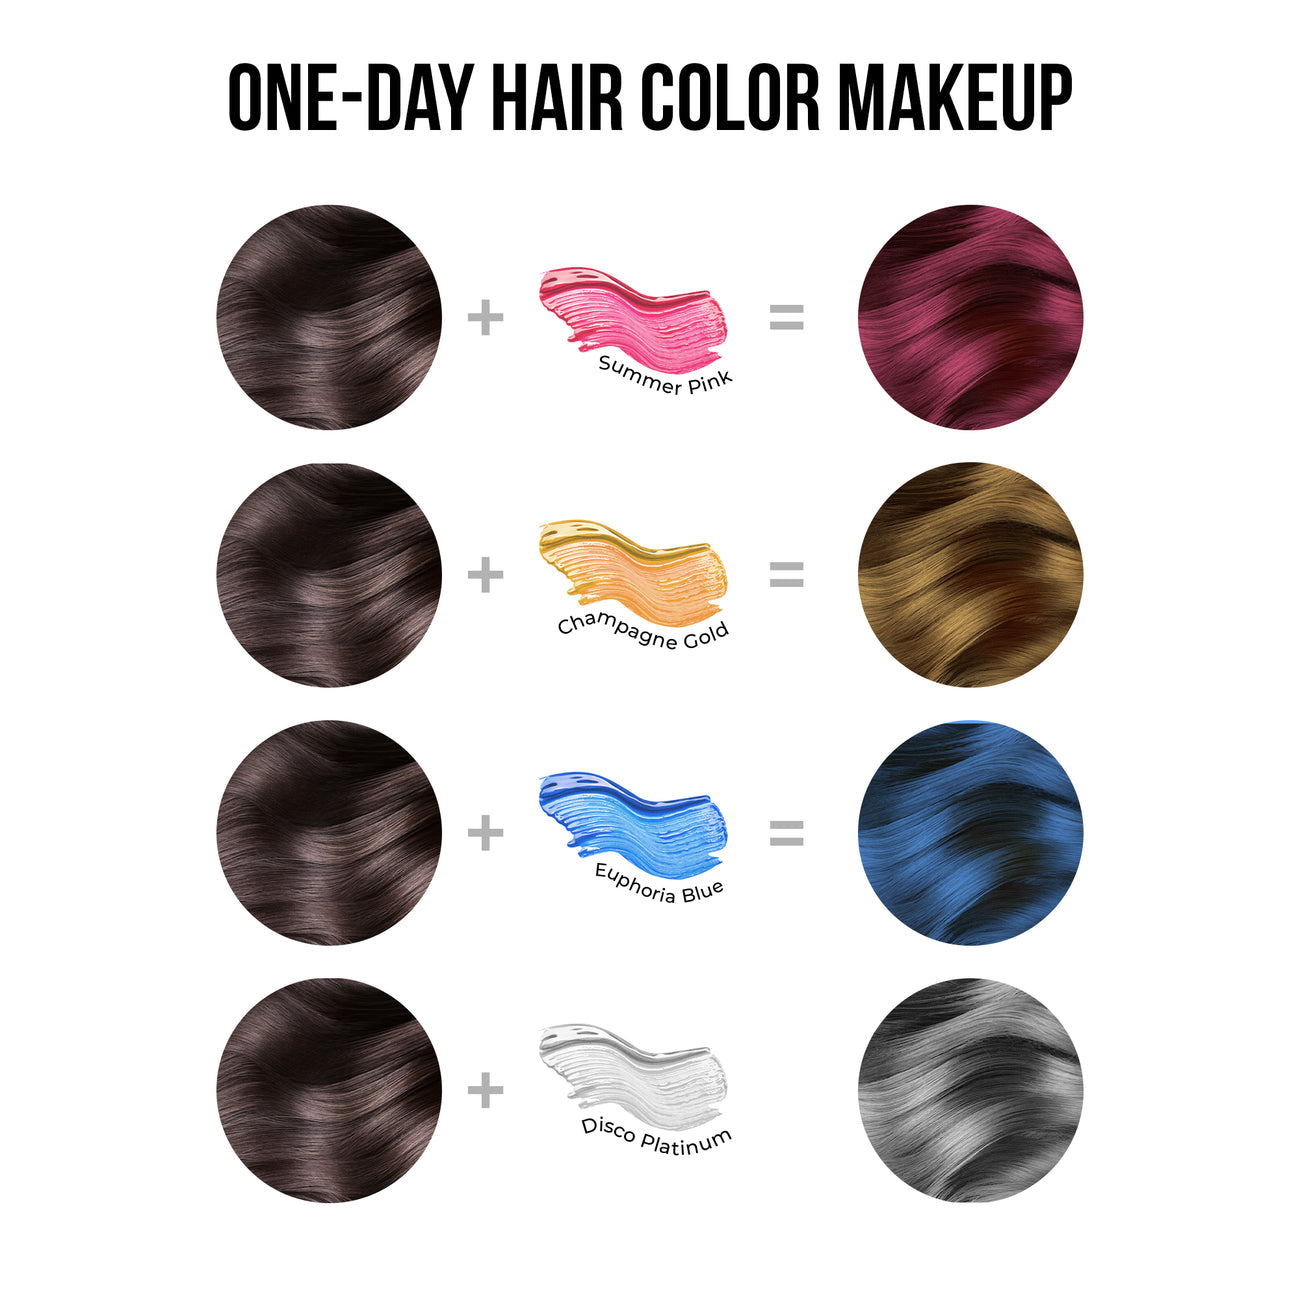 Colorisma Temporary 1-Wash Hair Color Makeup - Make Your Combo